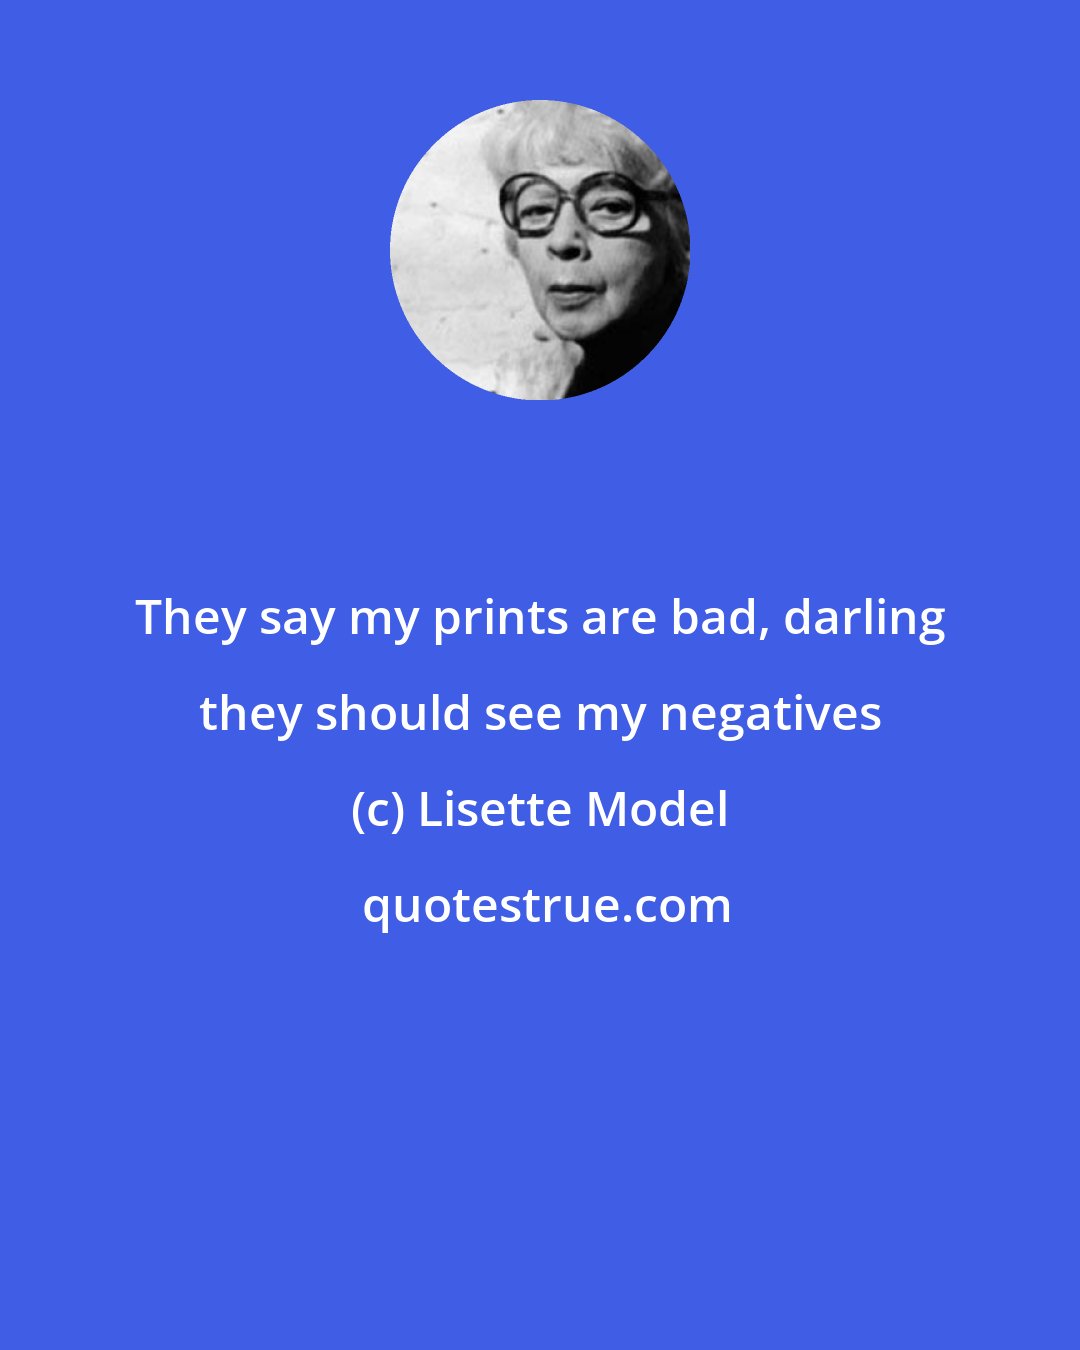 Lisette Model: They say my prints are bad, darling they should see my negatives